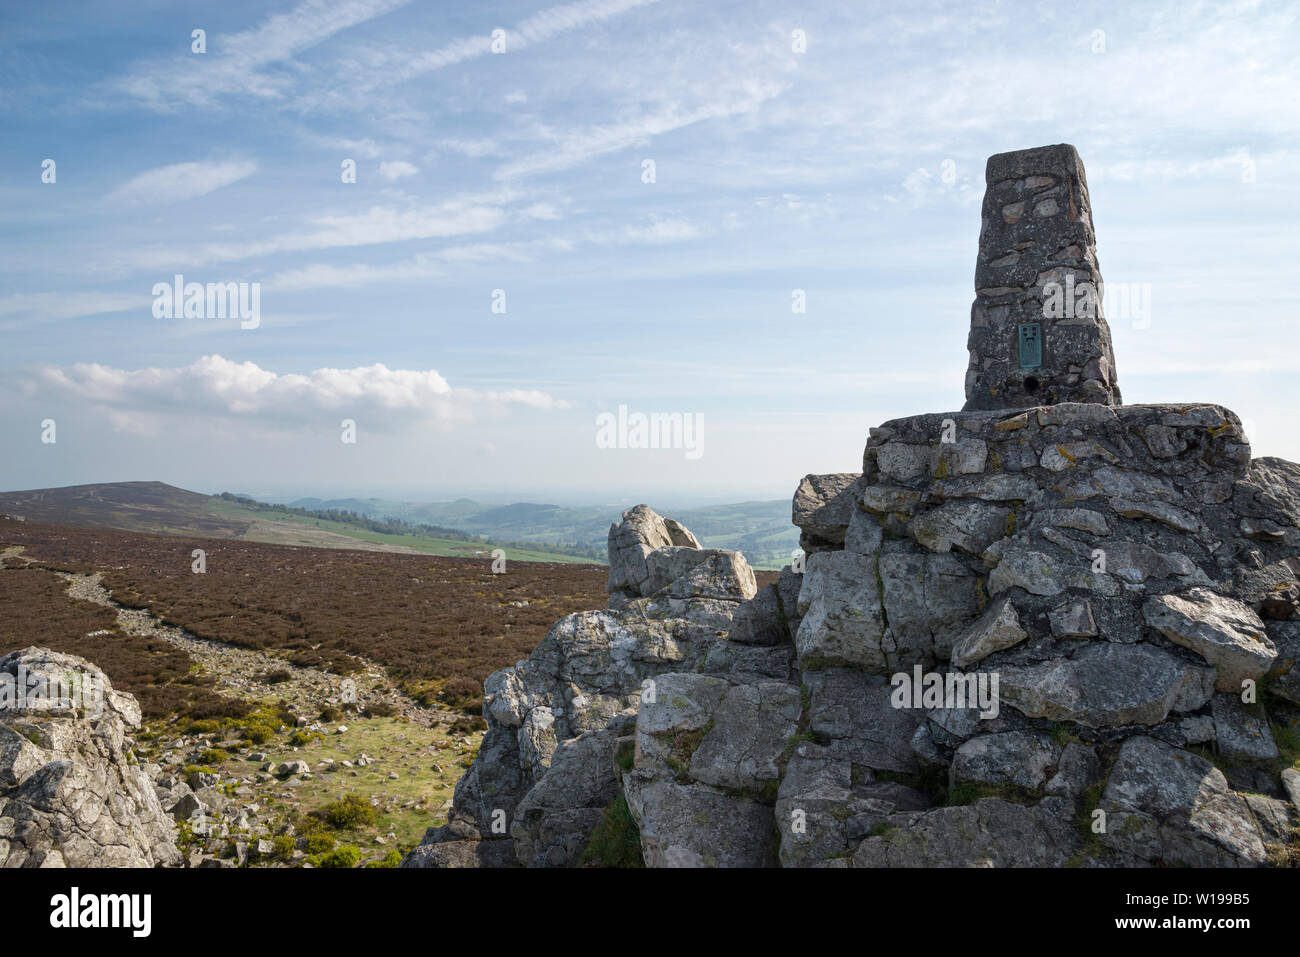 The Stiperstones, Shropshire, England. Trig point on Manstone rock. Stock Photo